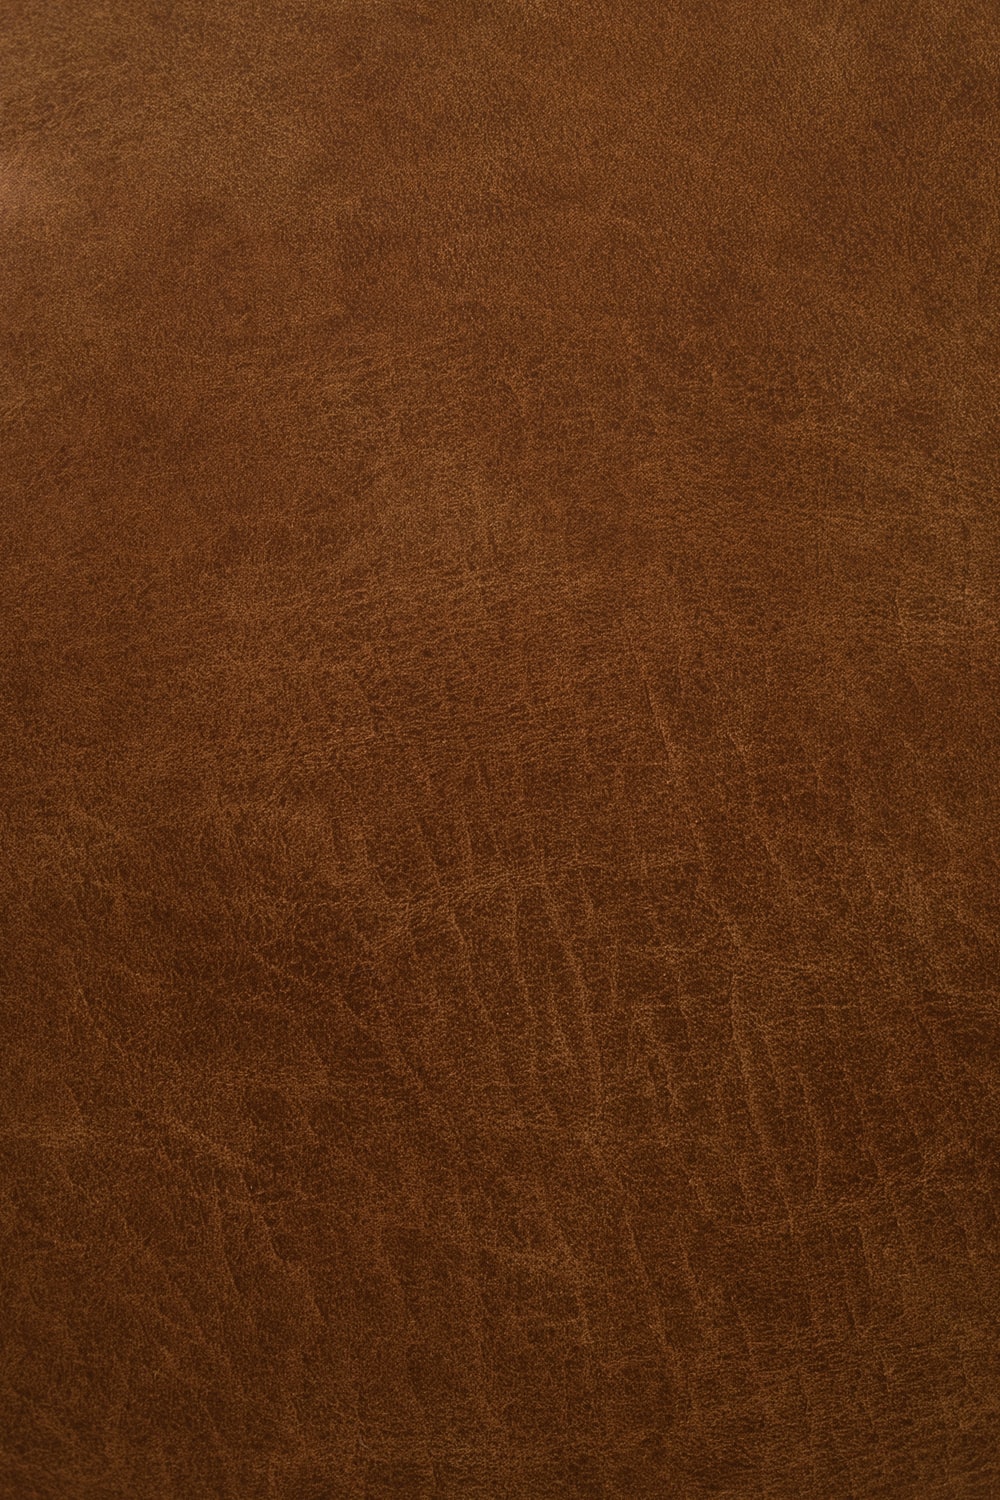 Leather Texture Picture. Download Free Image